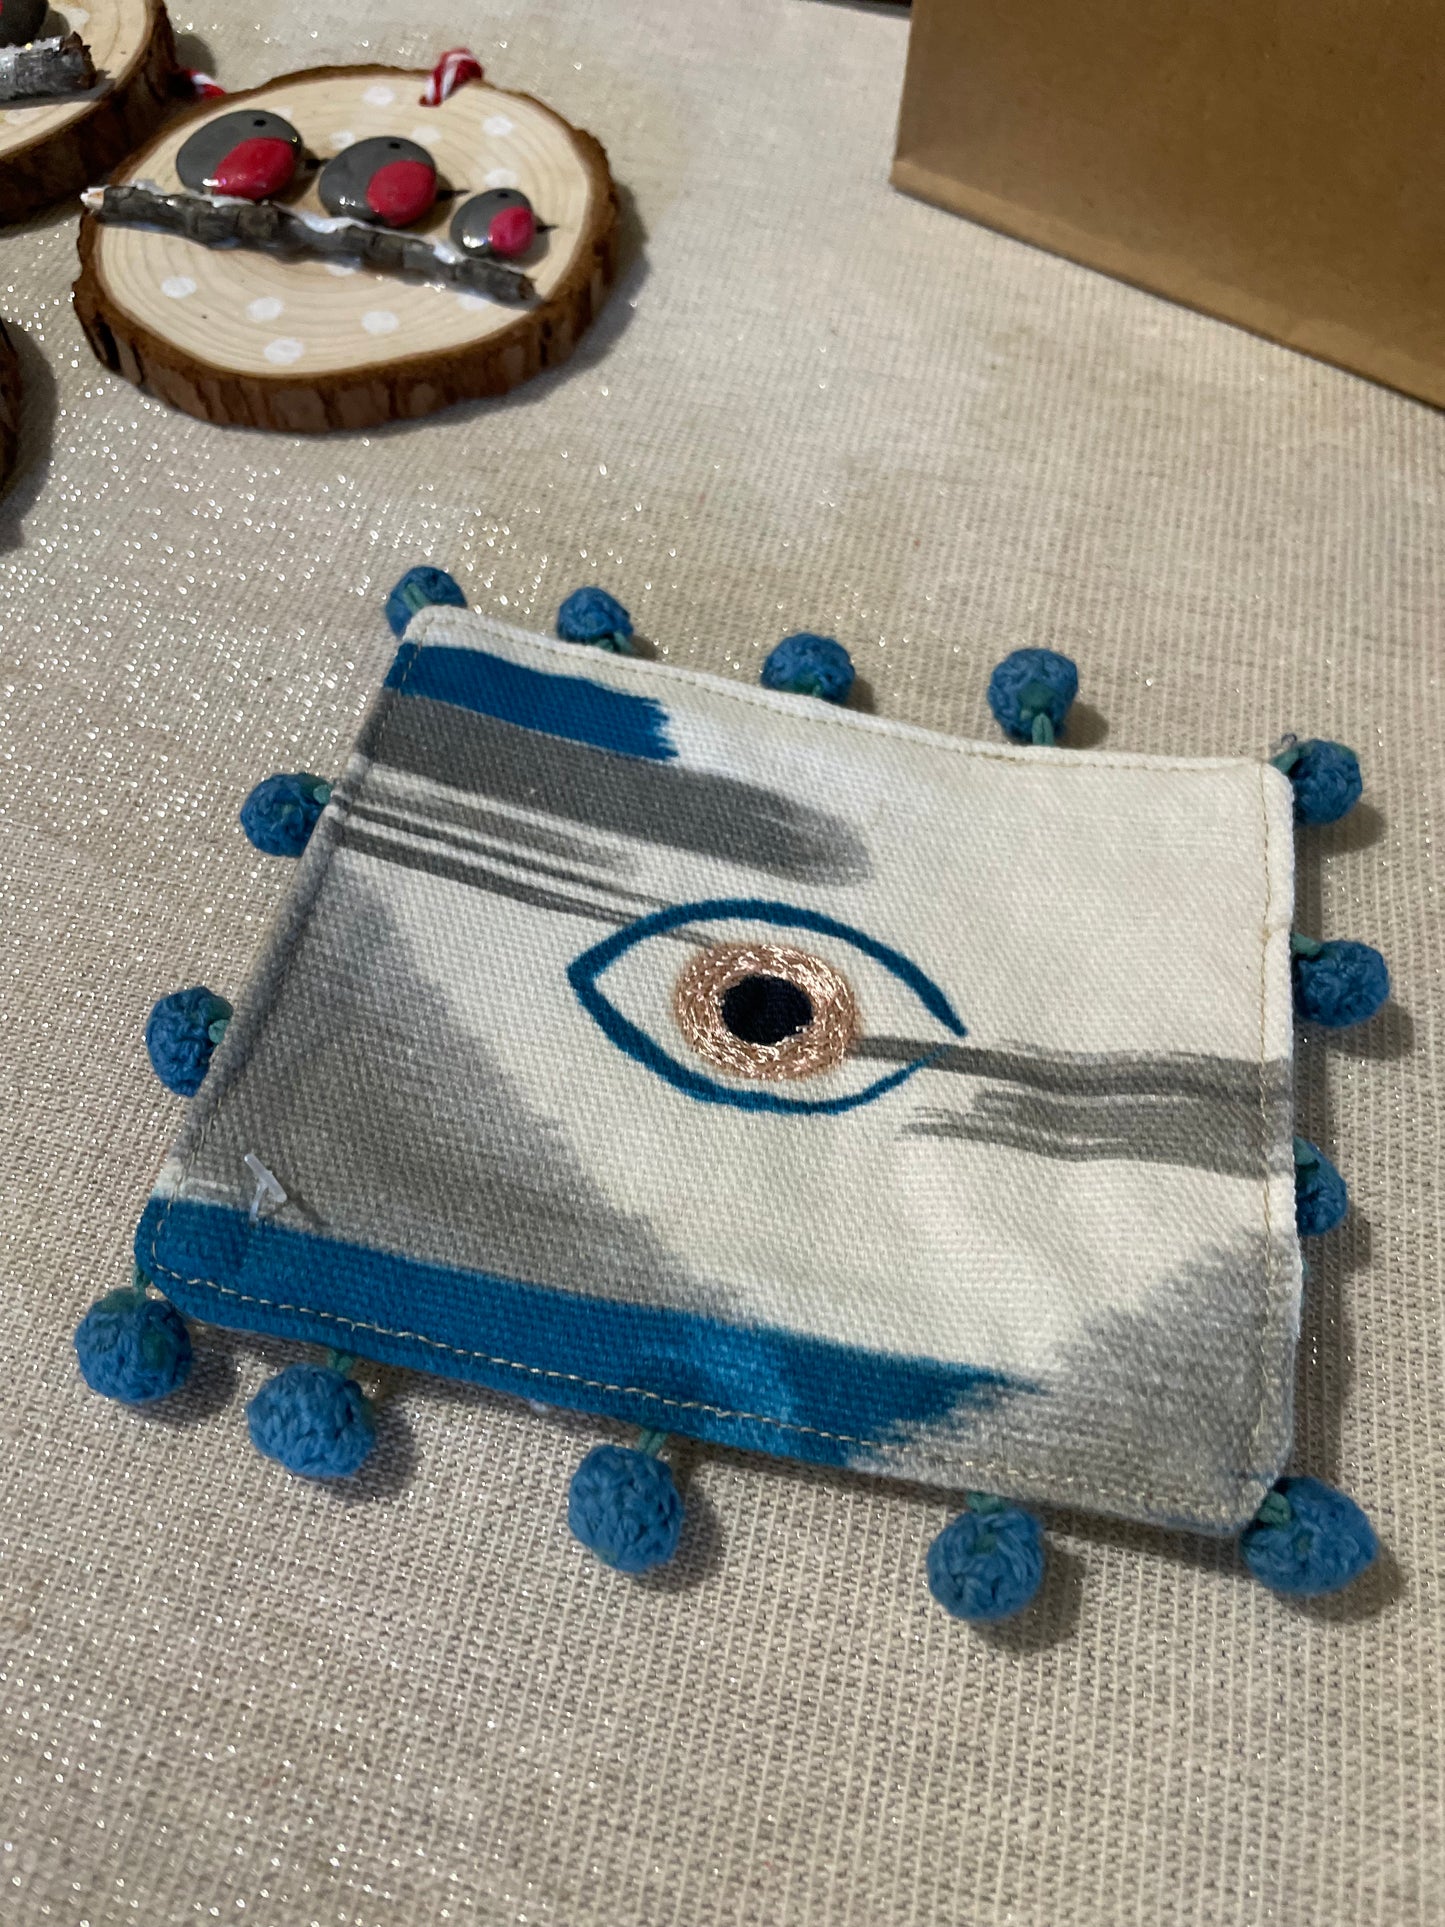 fabric coaster with evil eye